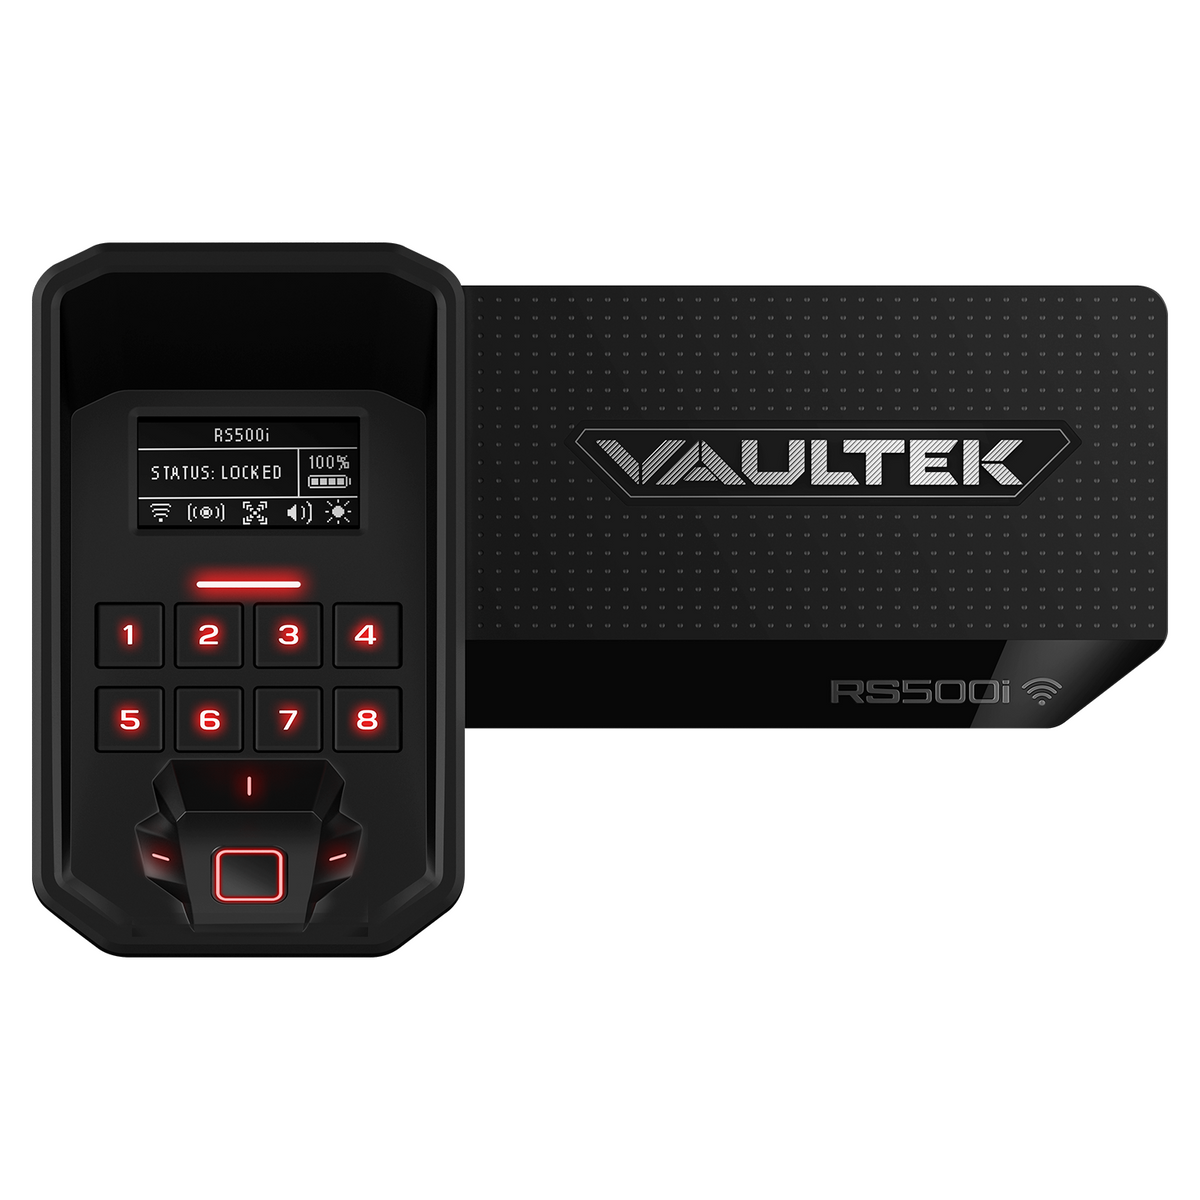 Vaultek - RS200i Plus Edition Wi-Fi Biometric Smart Rifle Safe with Maxed Out Accessory Kit